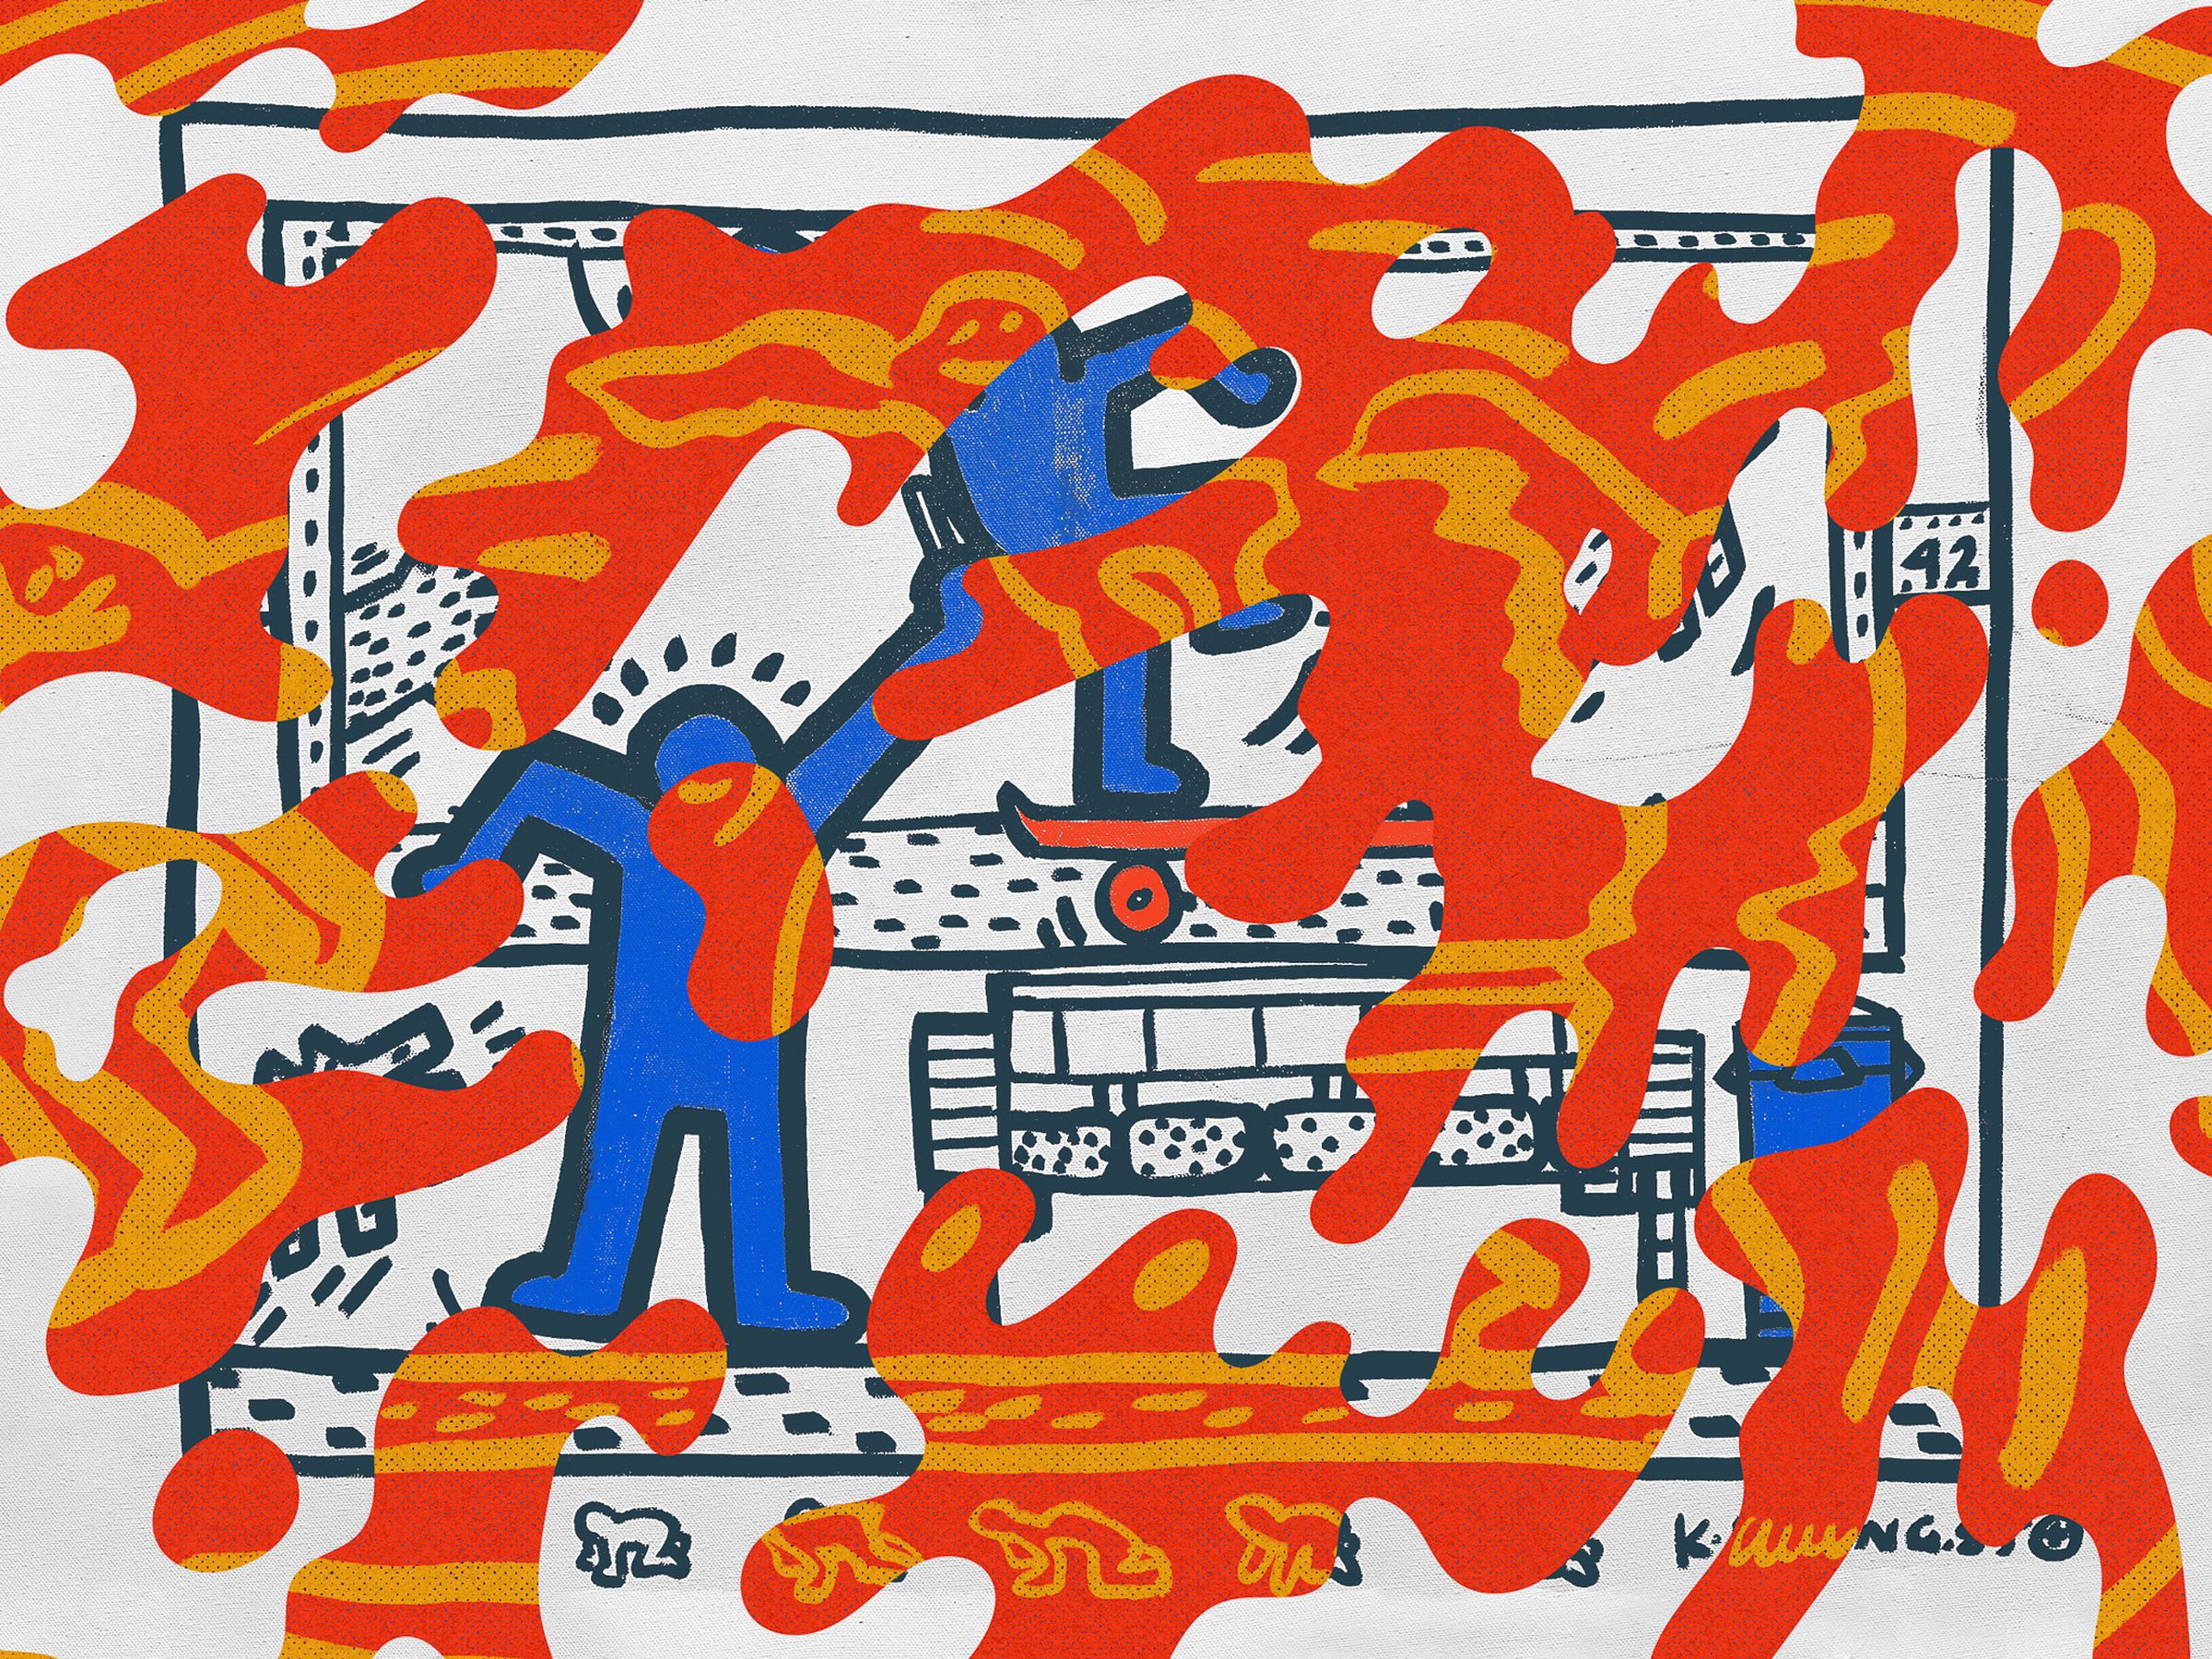 Two images of Keith Haring’s “Skateboarders” each in a different art style.